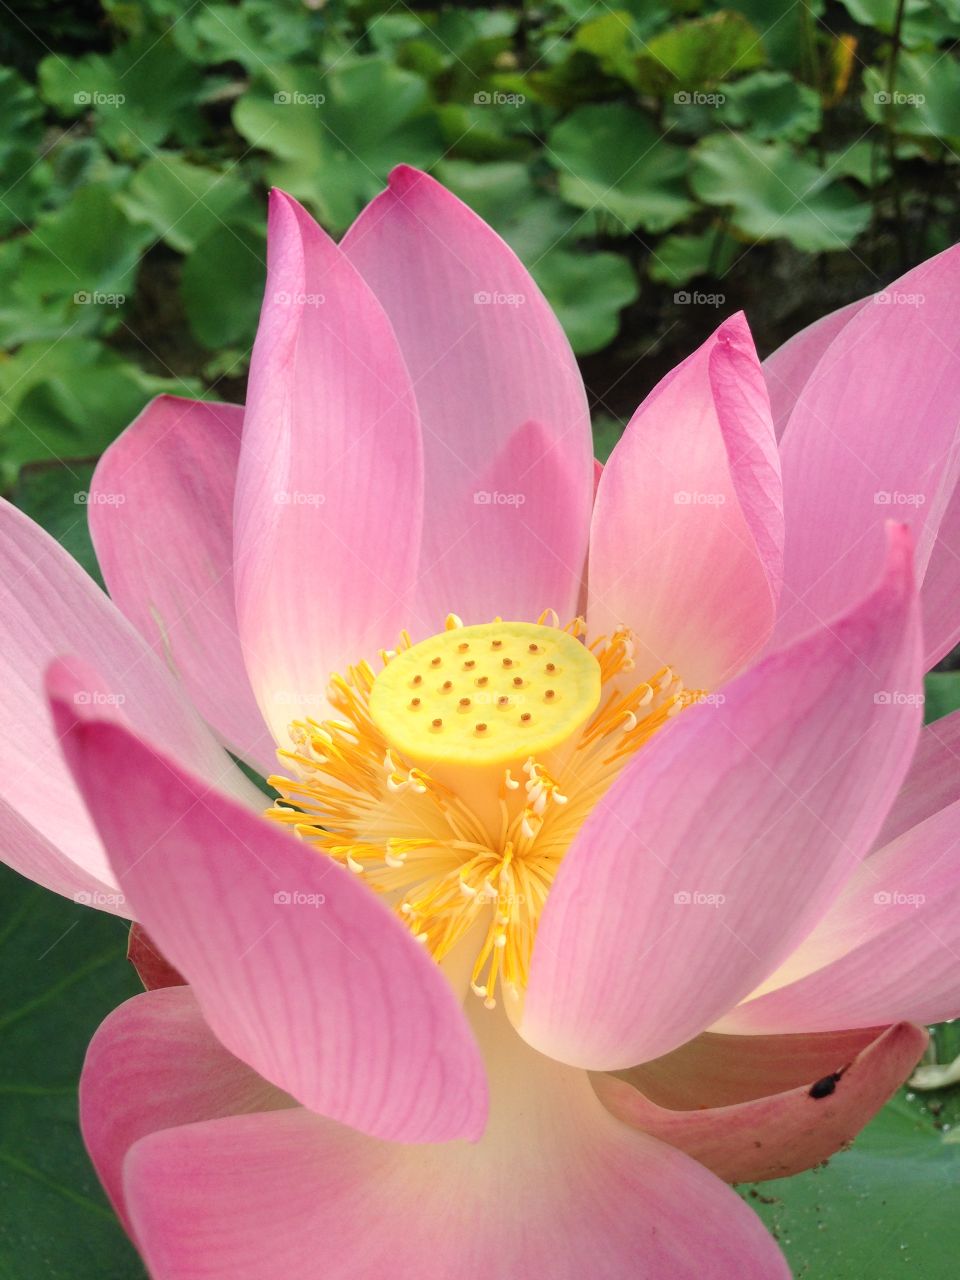 A lotus blossom in the morning